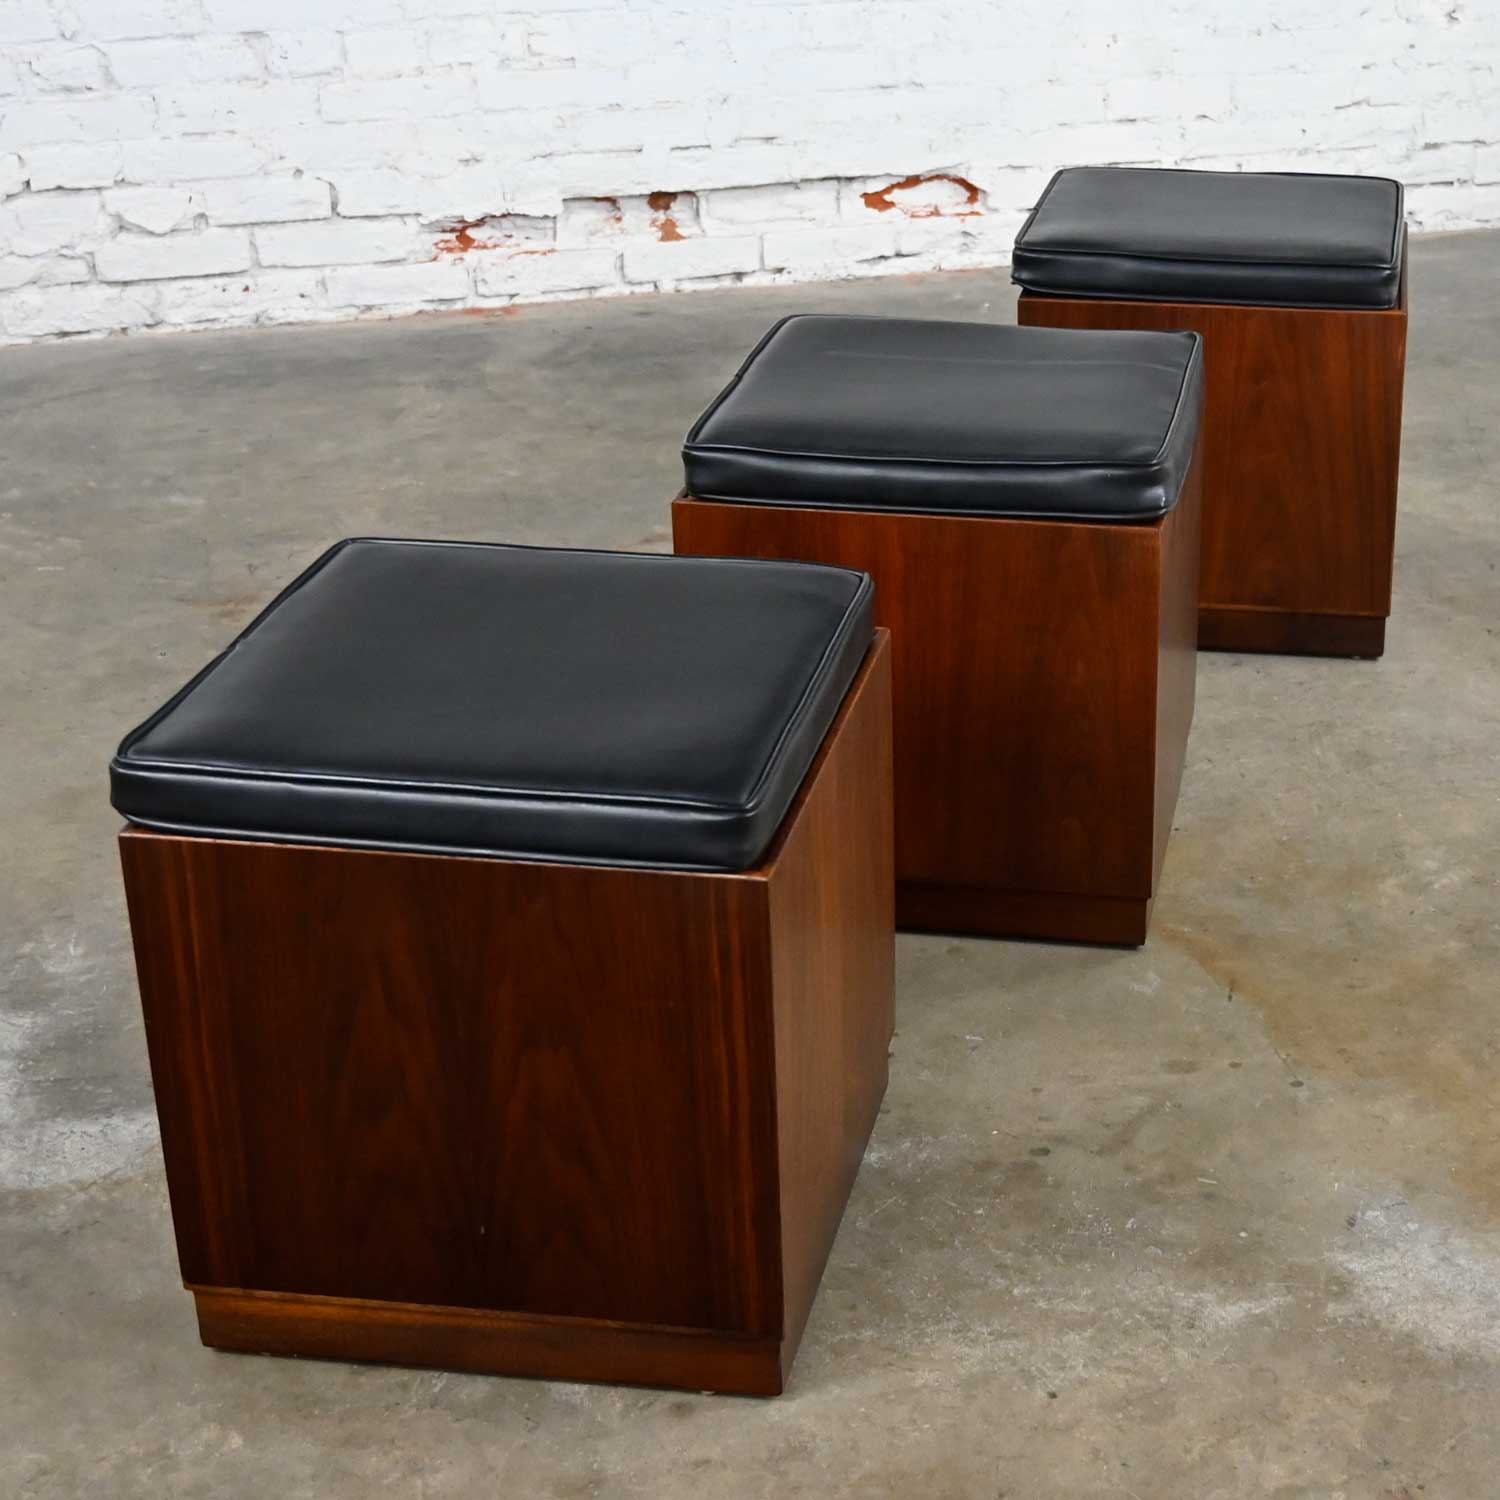 Mid-Century Modern Trio Square Walnut Cube Stools Black Upholstered Tops by Jack Cartwright for Founders Furniture Patterns 7 Line